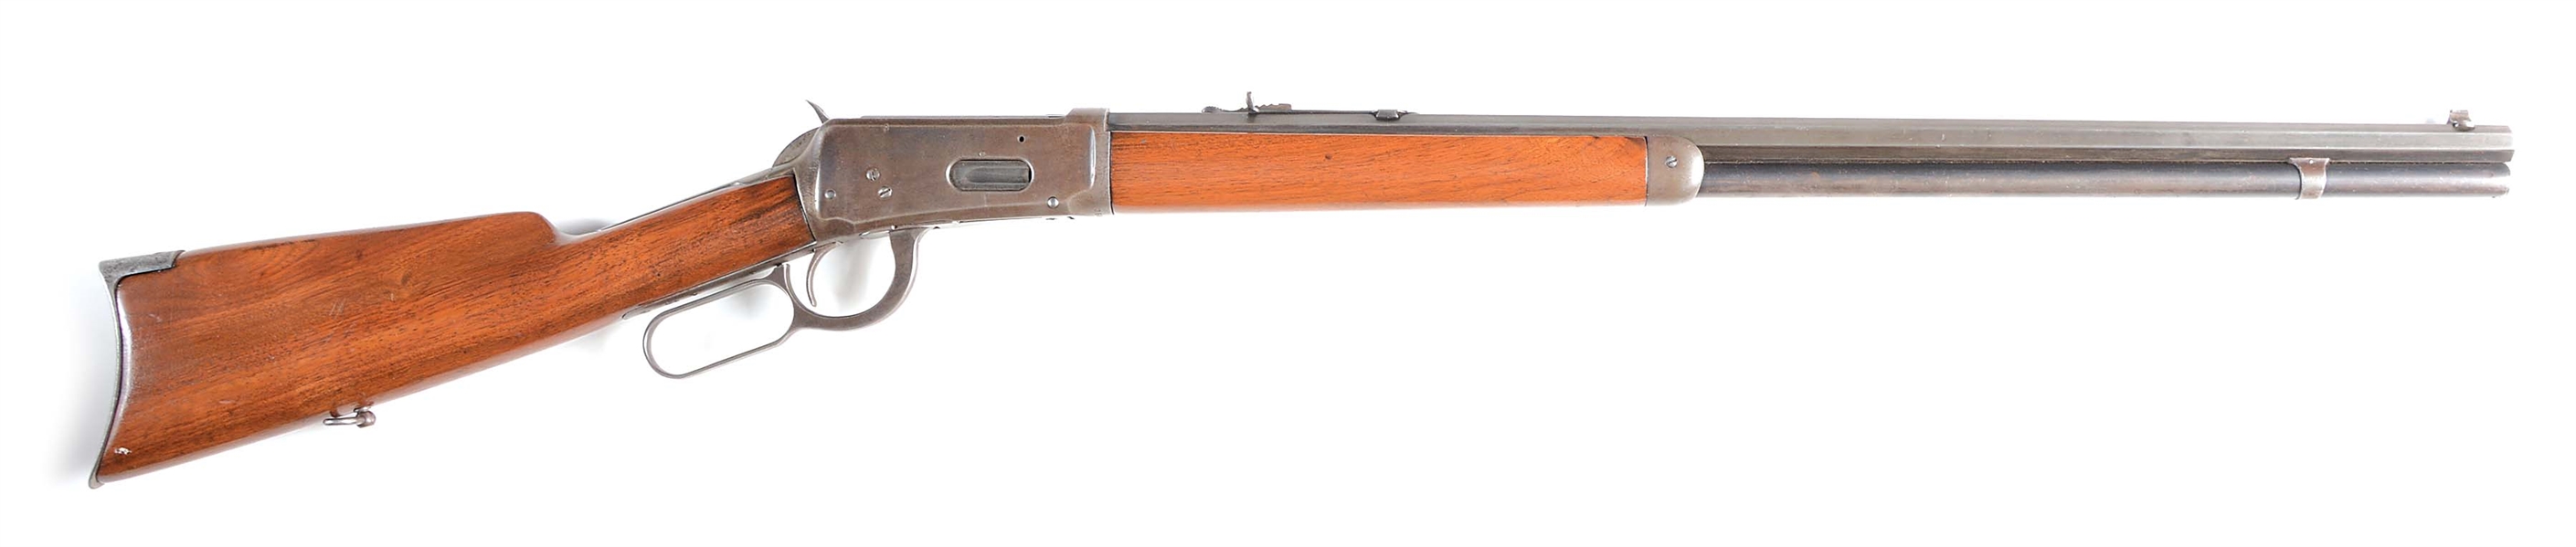 (C) WINCHESTER MODEL 1894 LEVER ACTION RIFLE (1906).